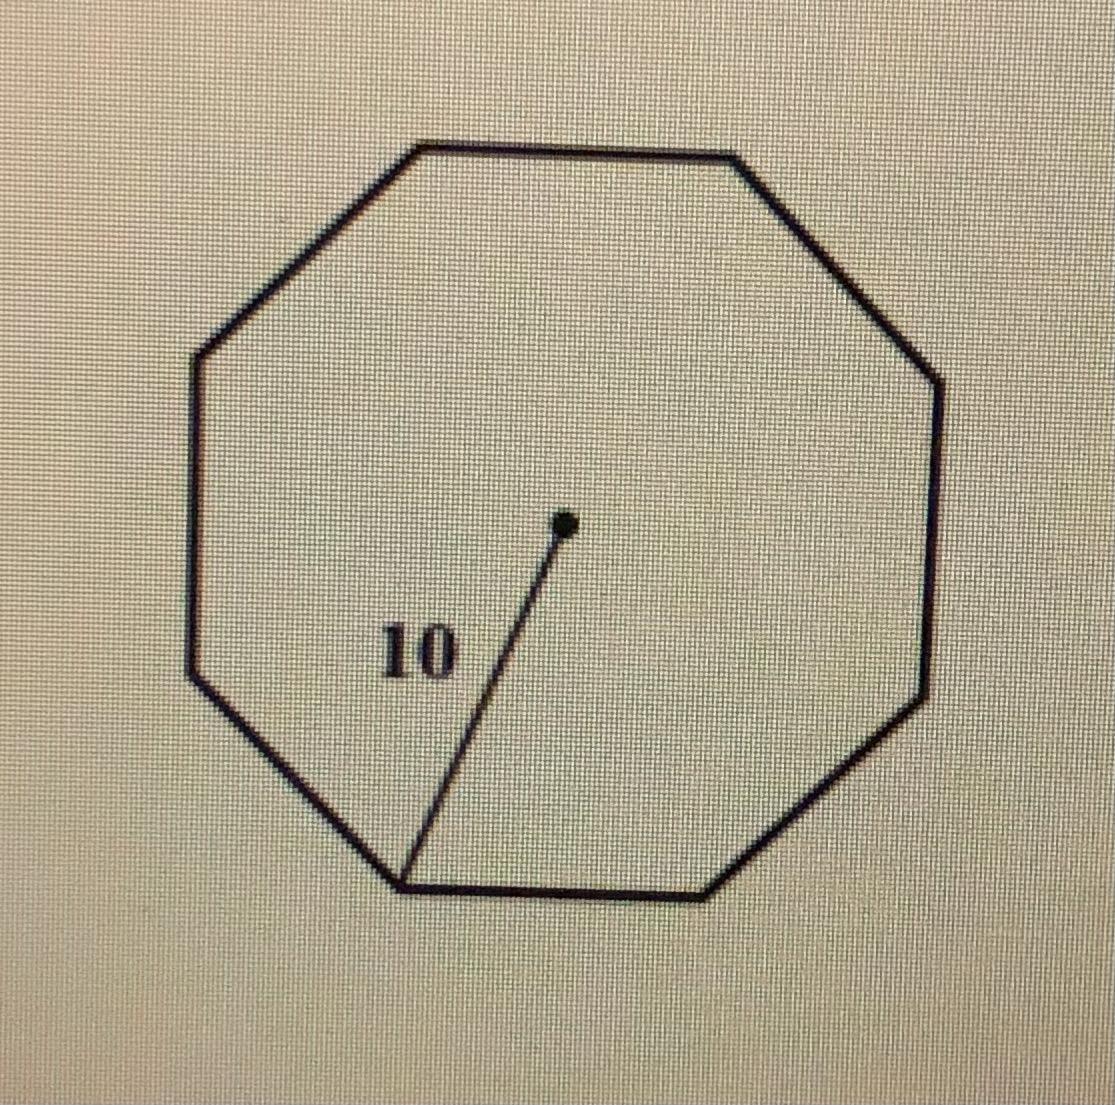 Find The Area Of The Regular Octagon Below And Show All Mathematical Reasoning.